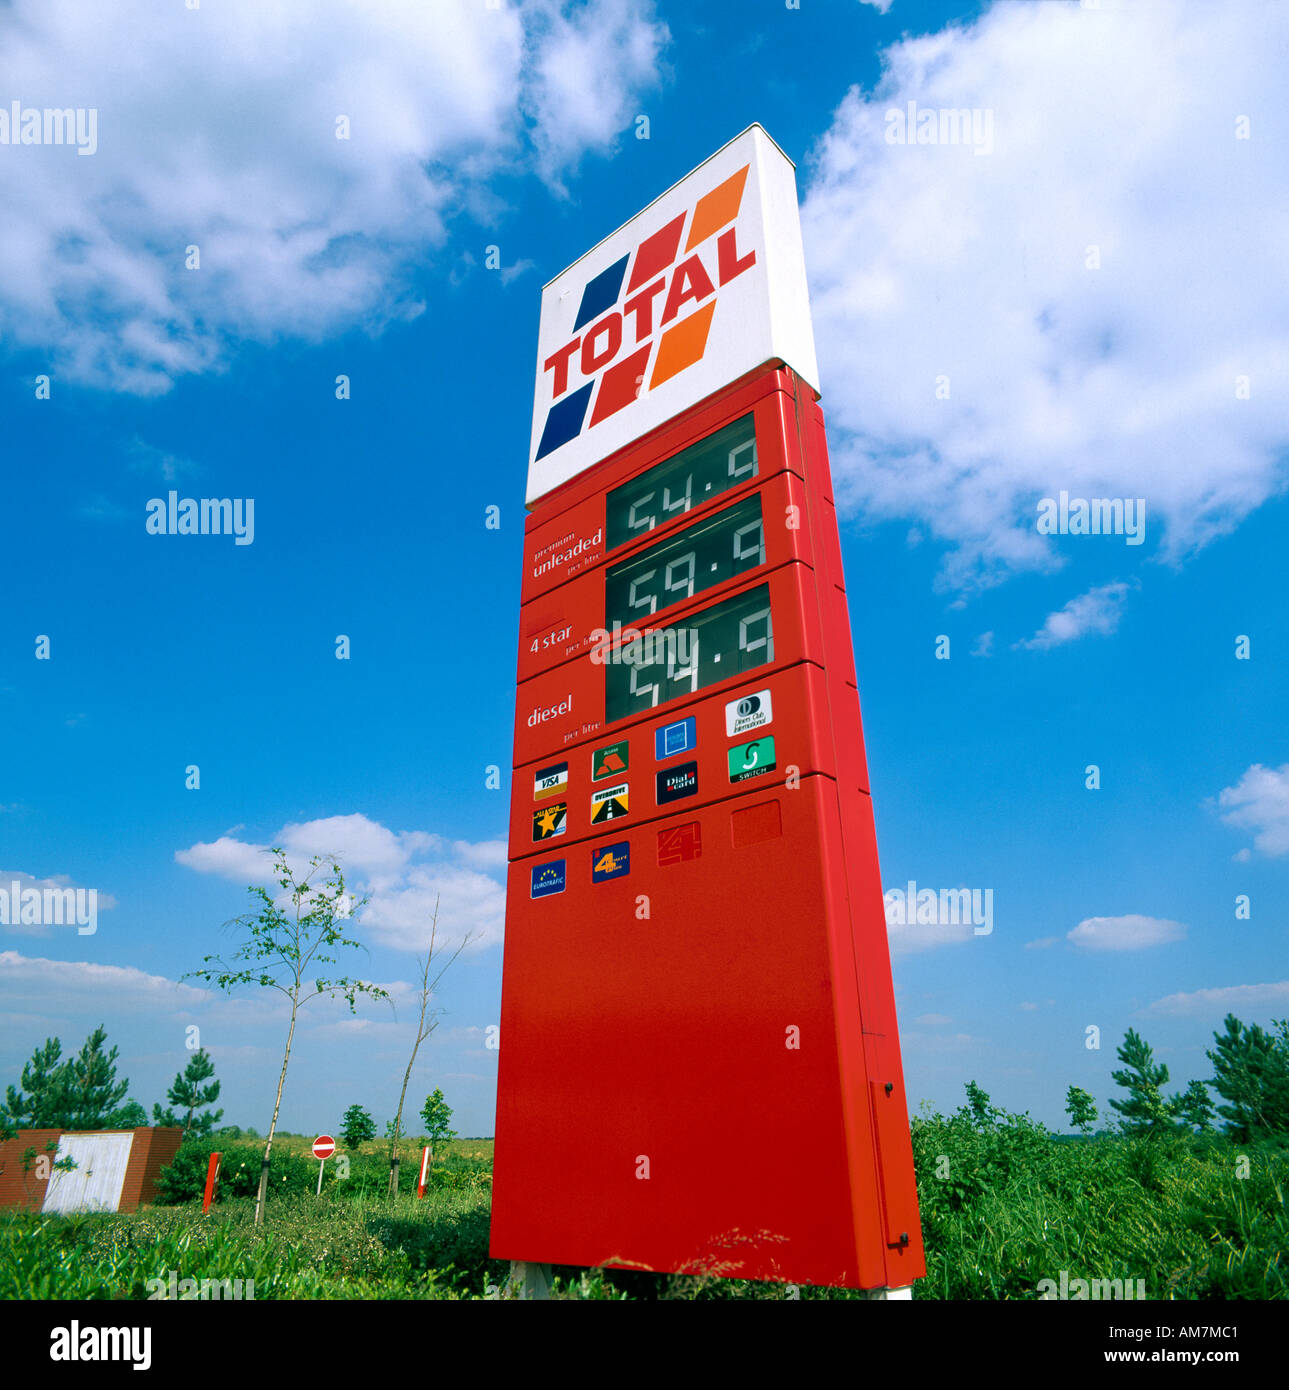 total petrol station with 1990 s prices Stock Photo - Alamy